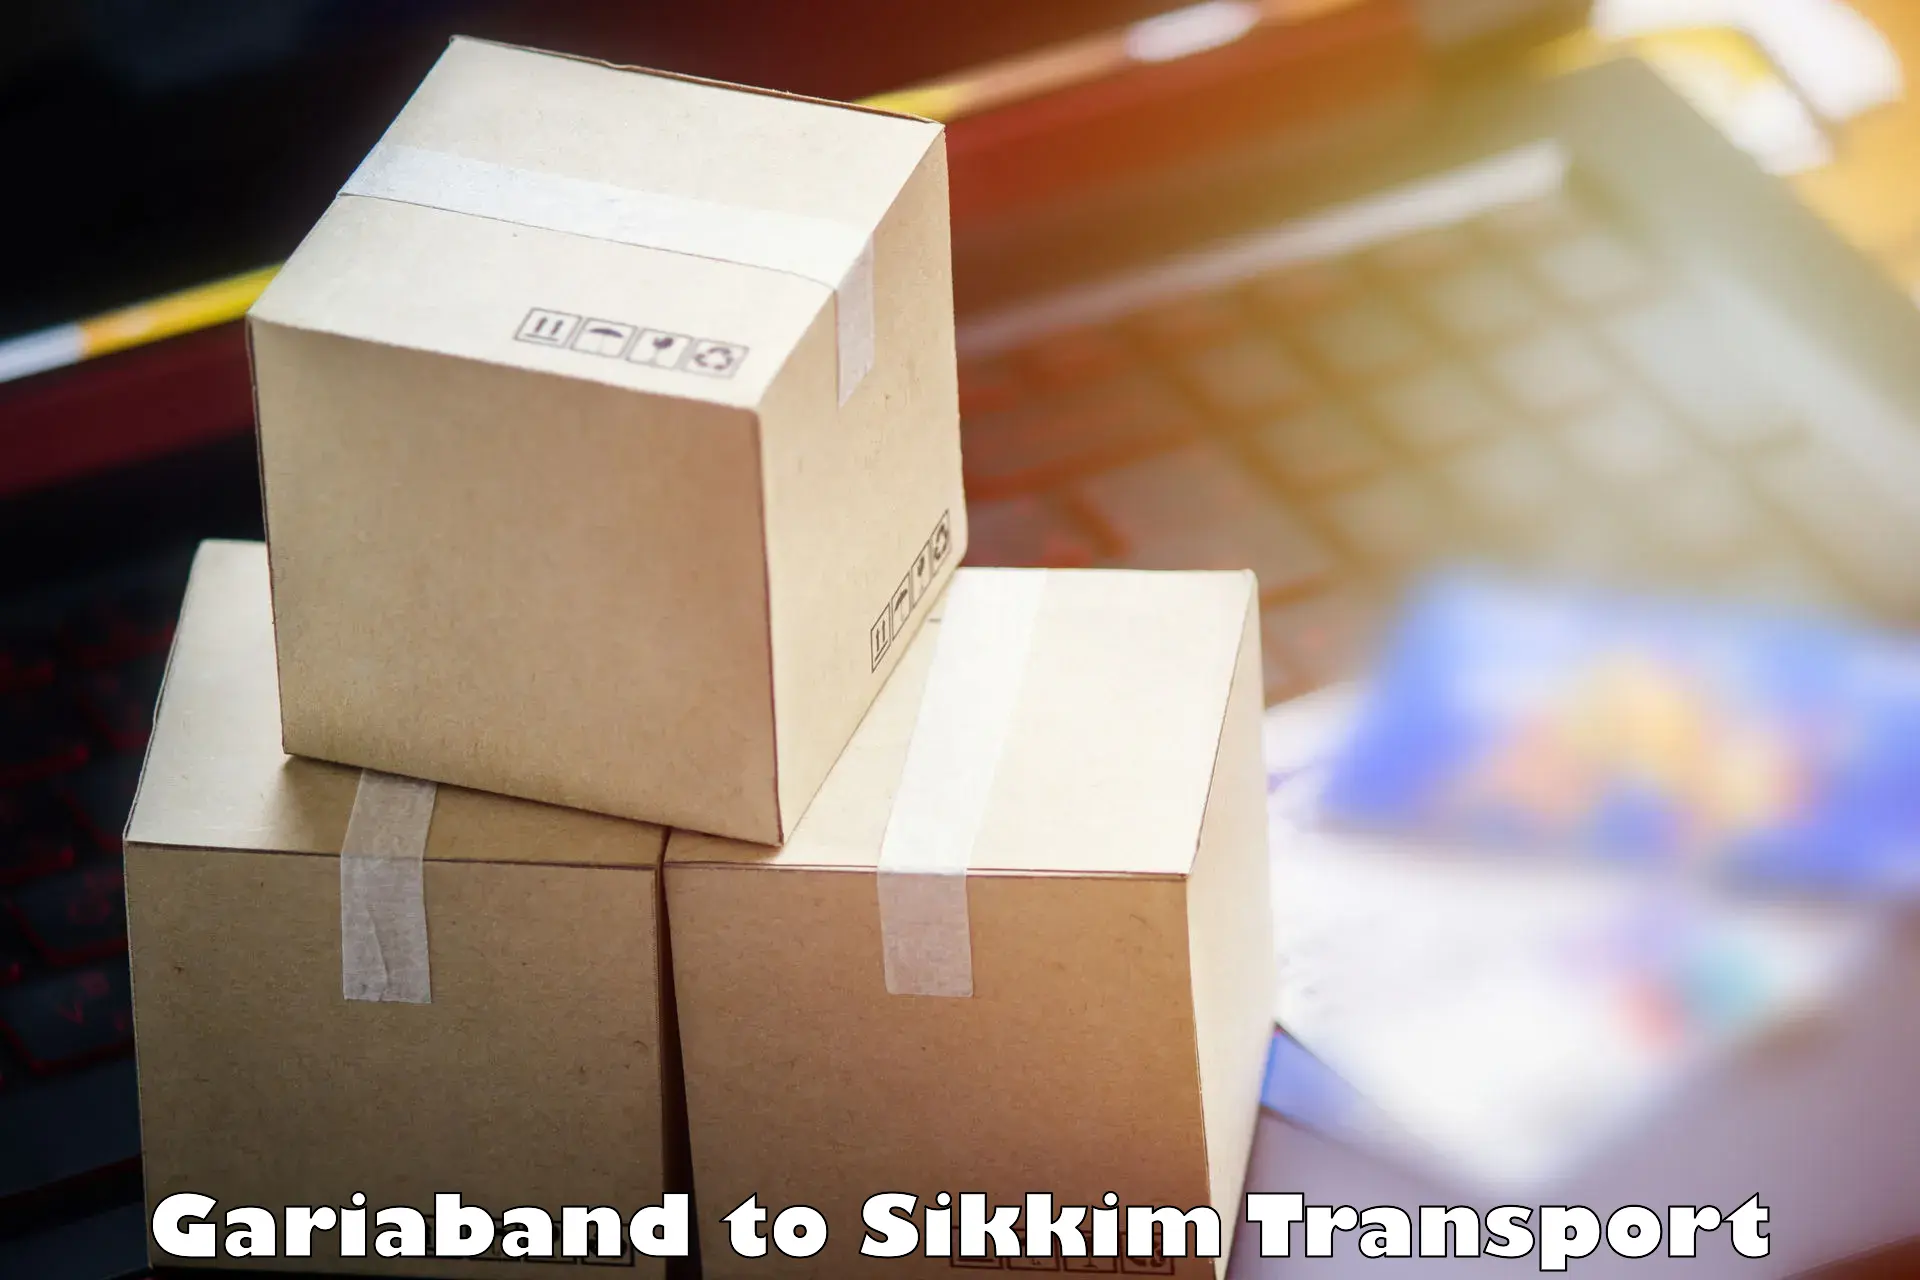 Cargo train transport services Gariaband to East Sikkim